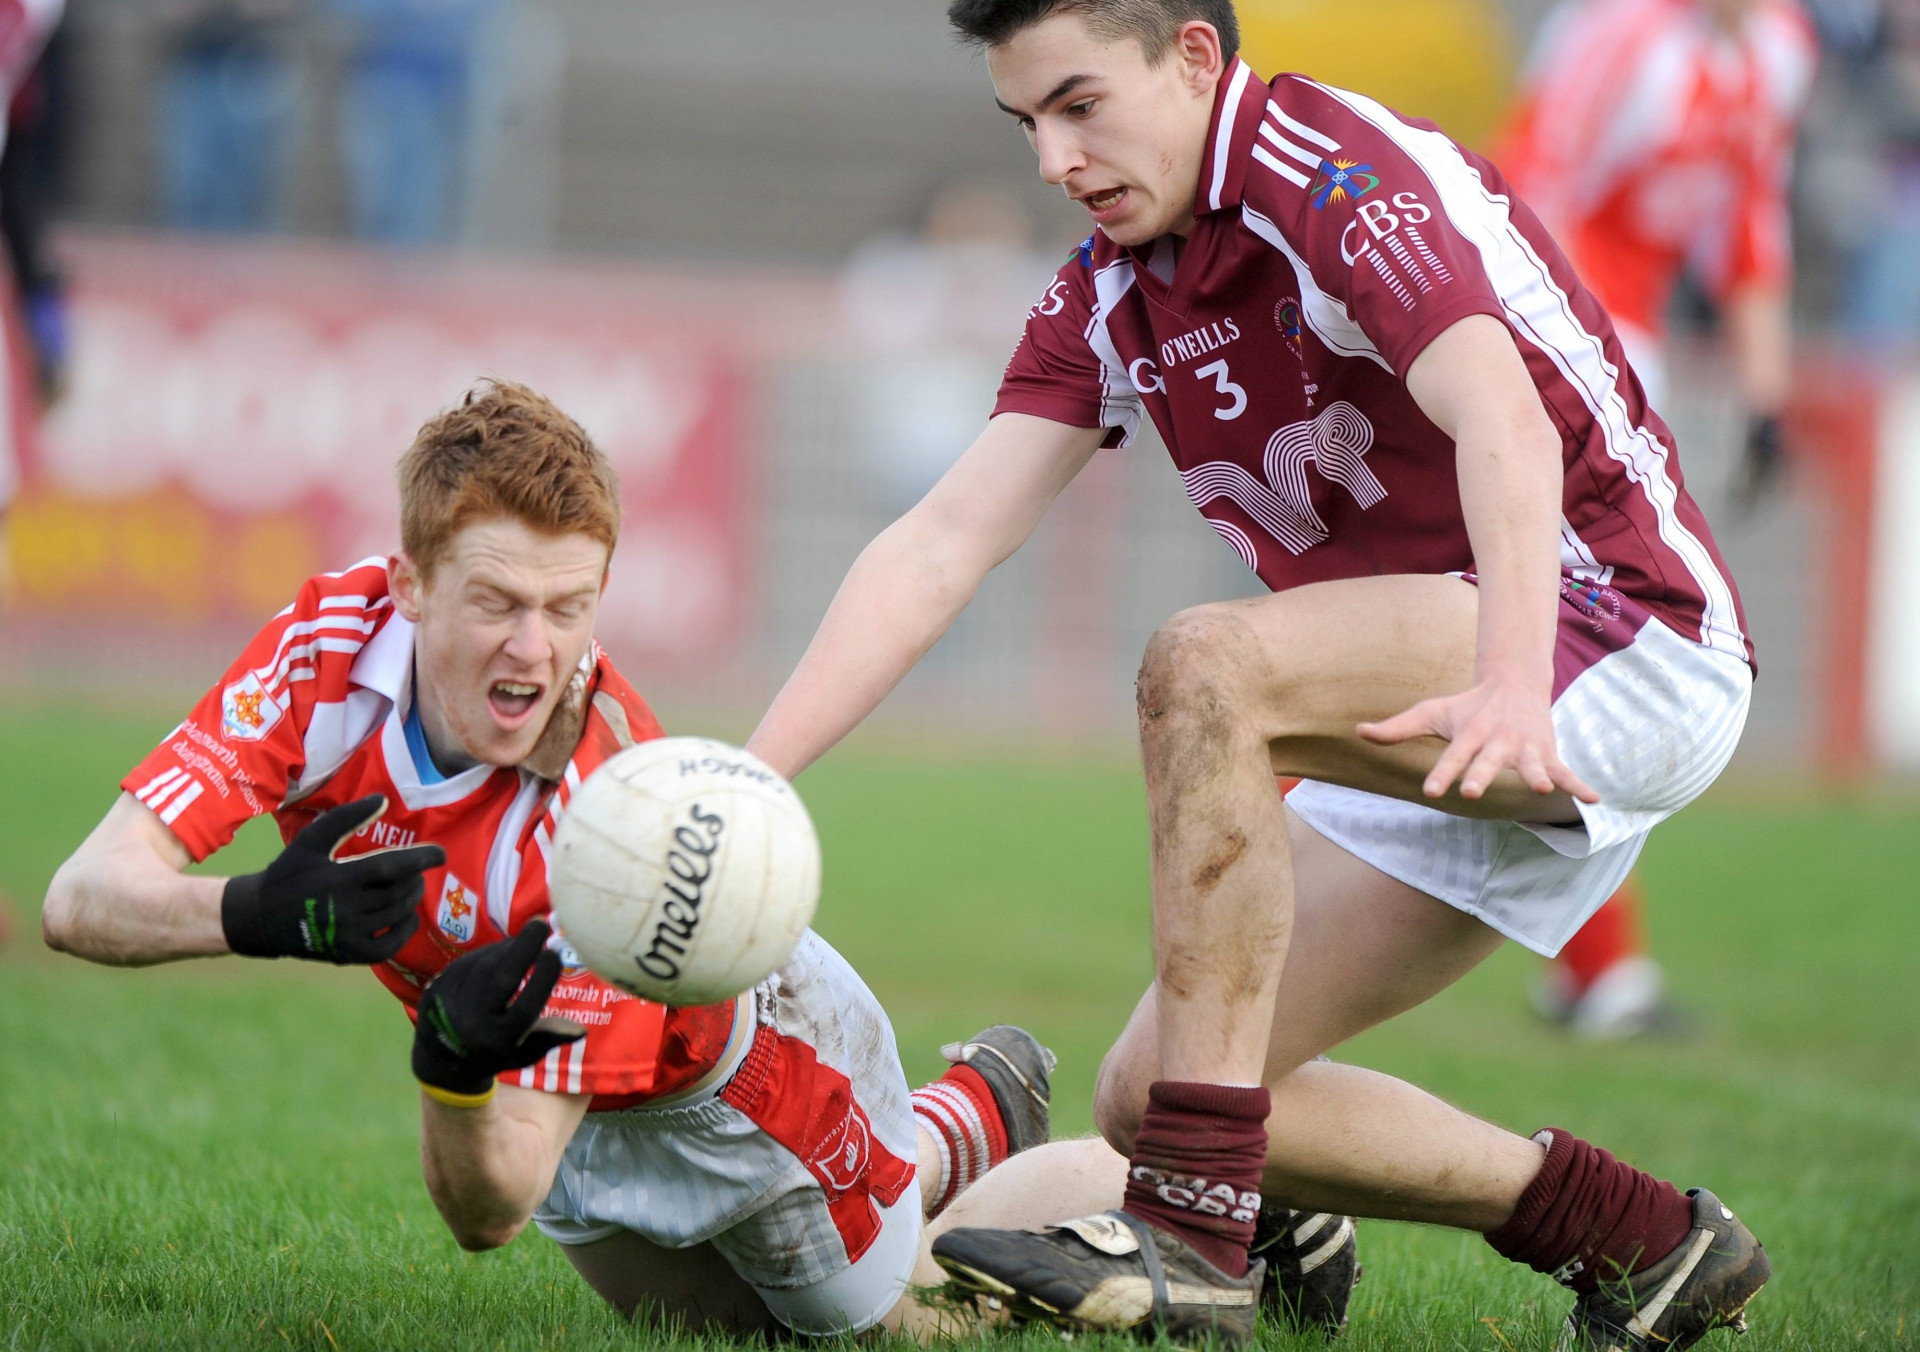 Mixed memories from the 2009 MacRory Cup Final